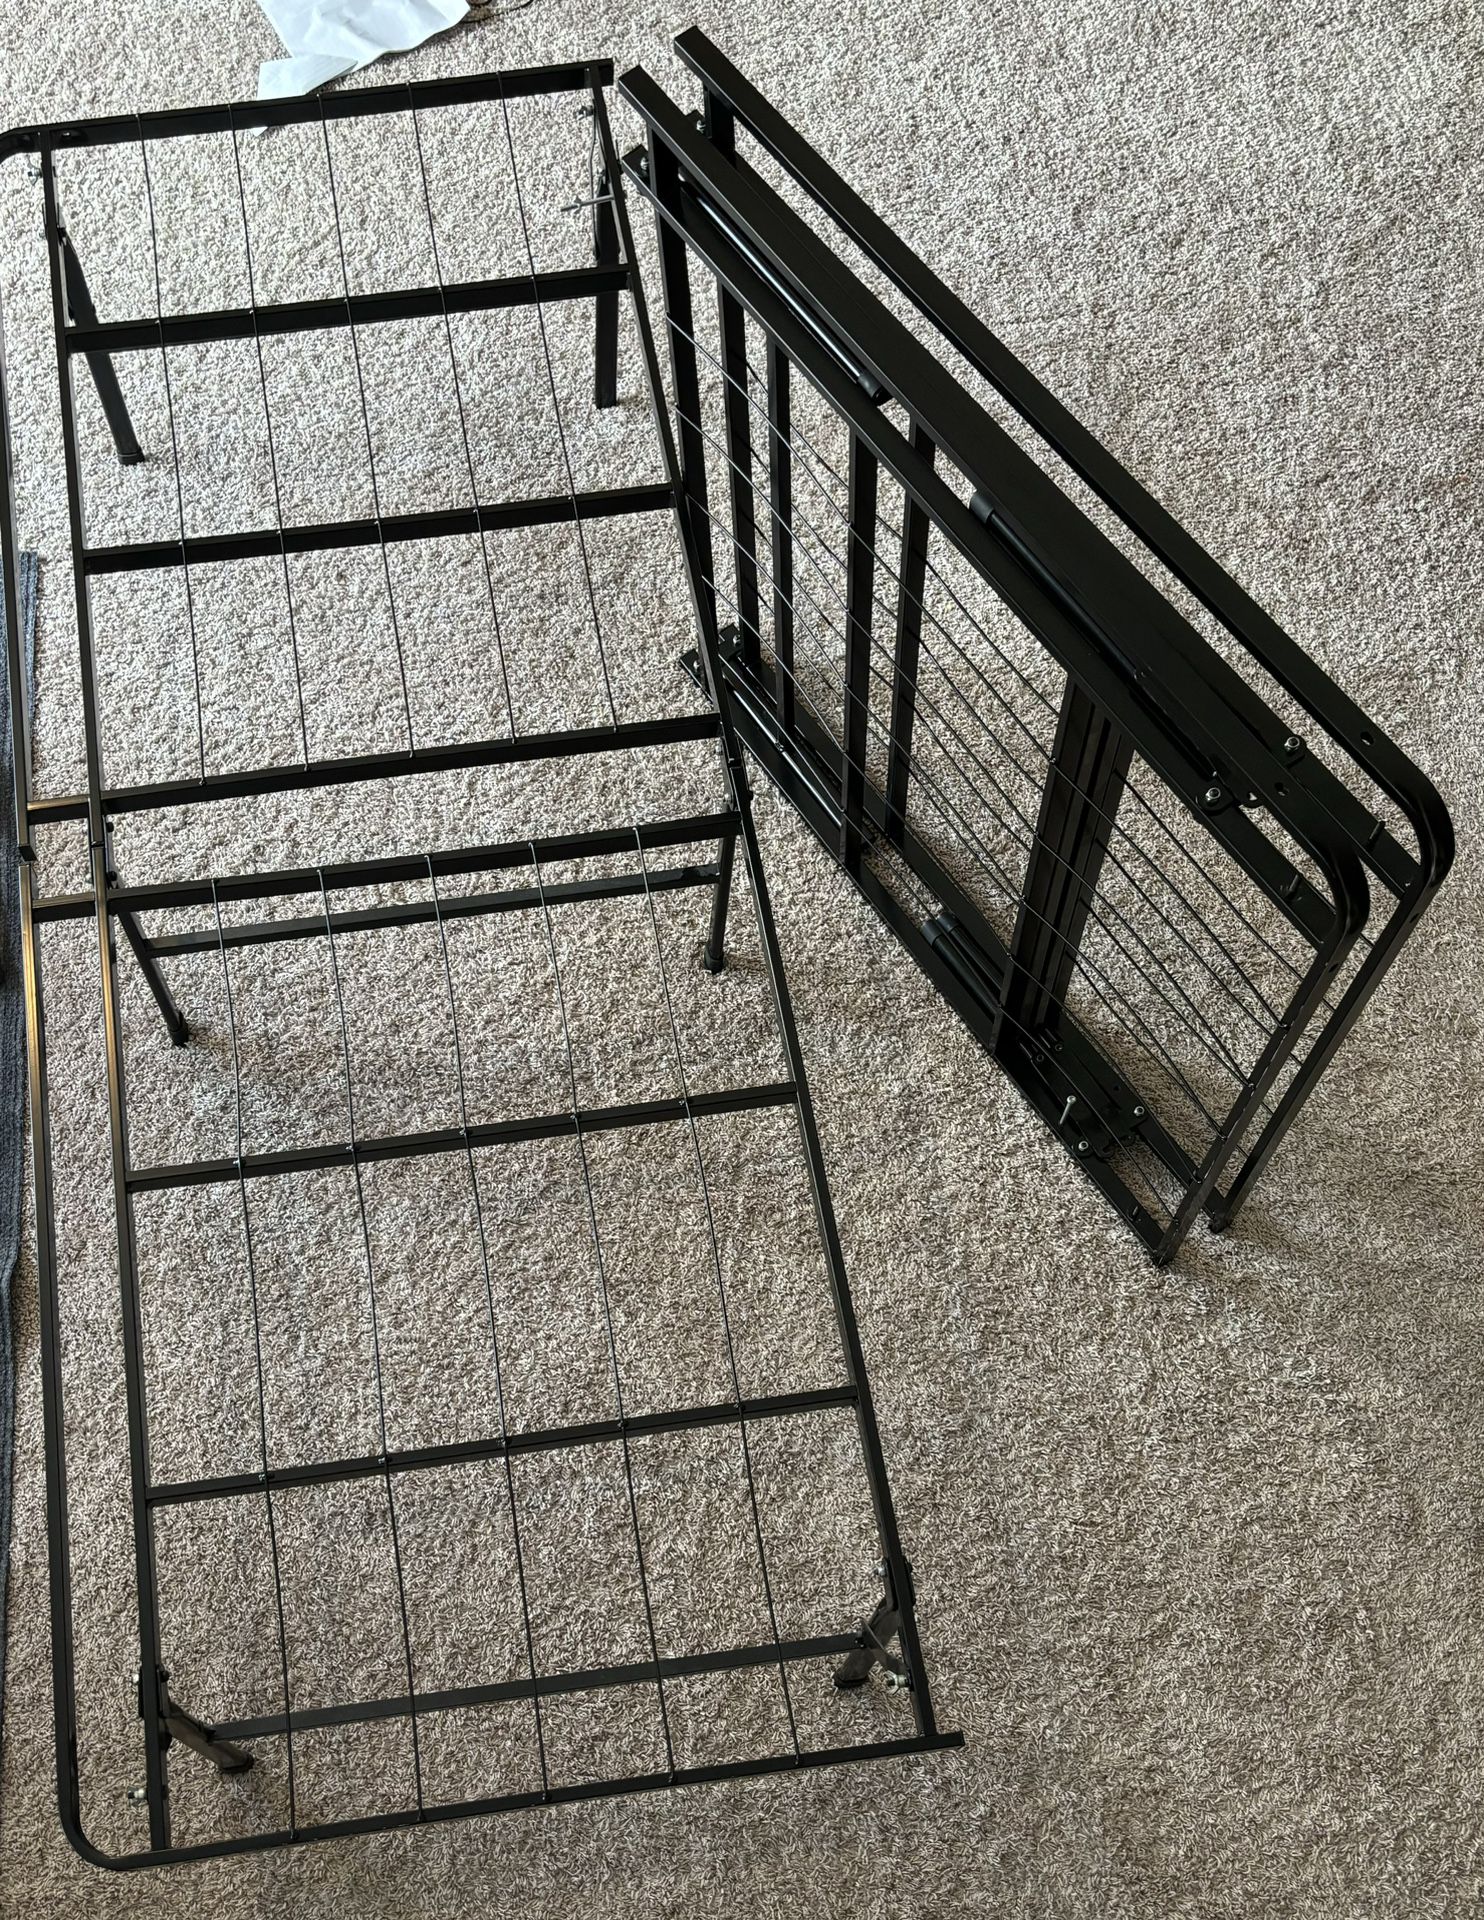 Bed frame Queen Size